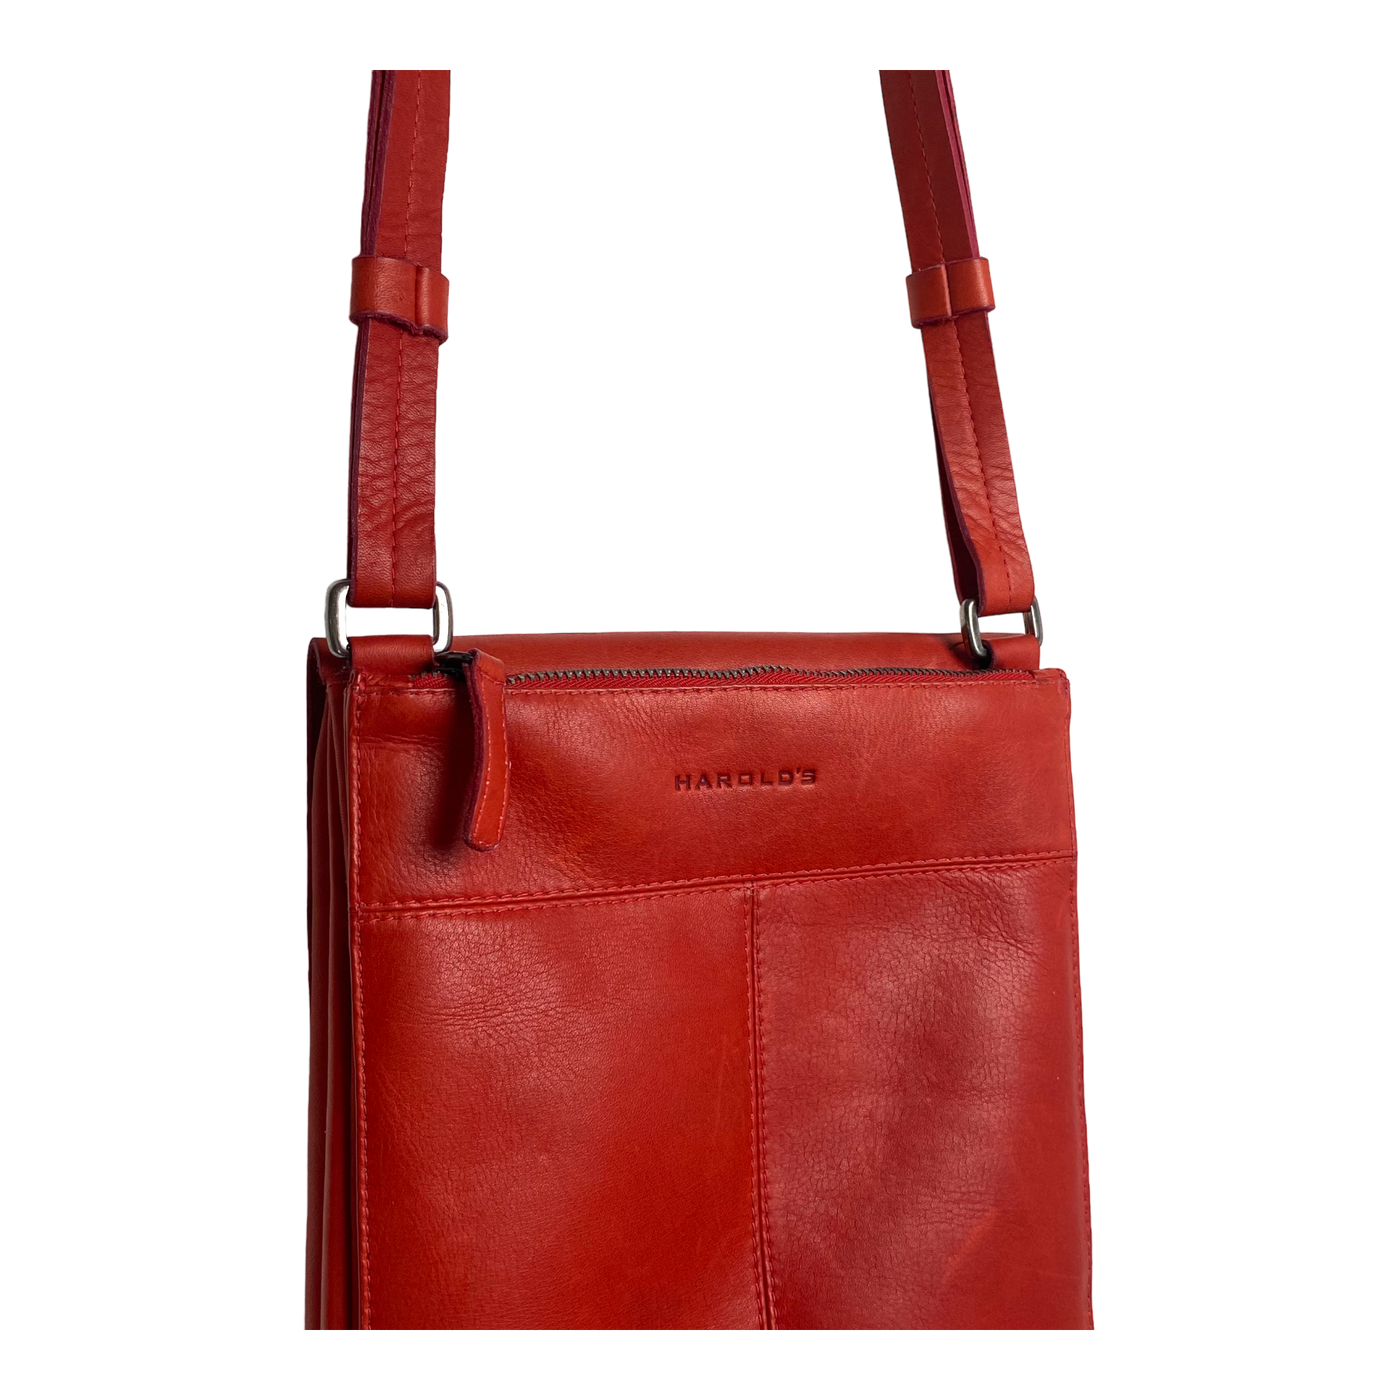 Harold's Bags leather campo plaid messenger bag, red